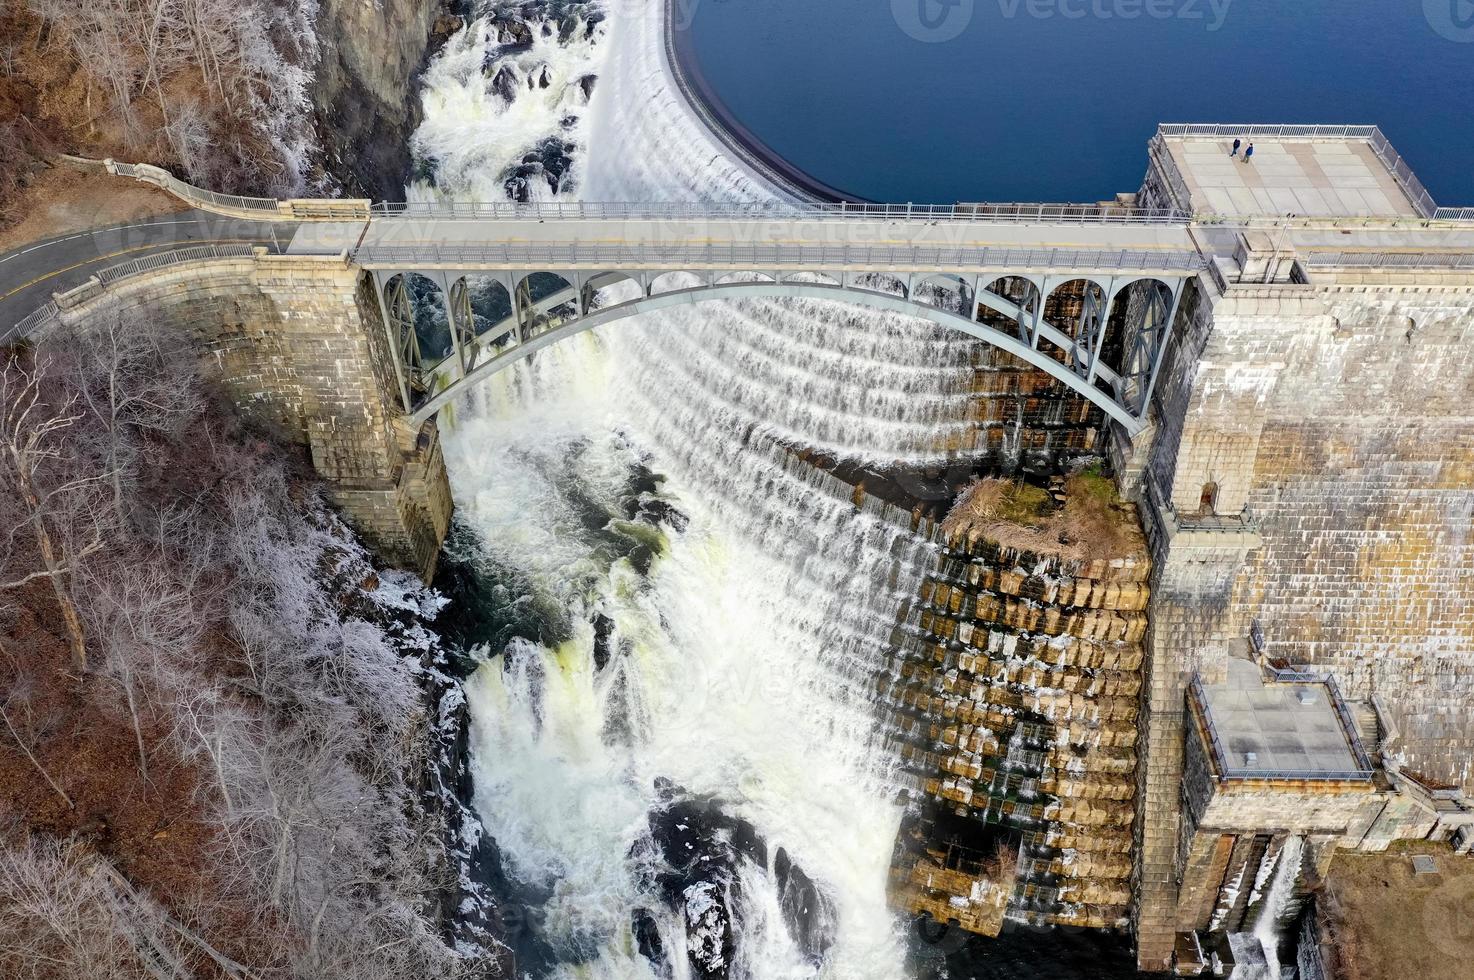 Croton Gorge Park at the base of New Croton Dam in Westchester, New York photo